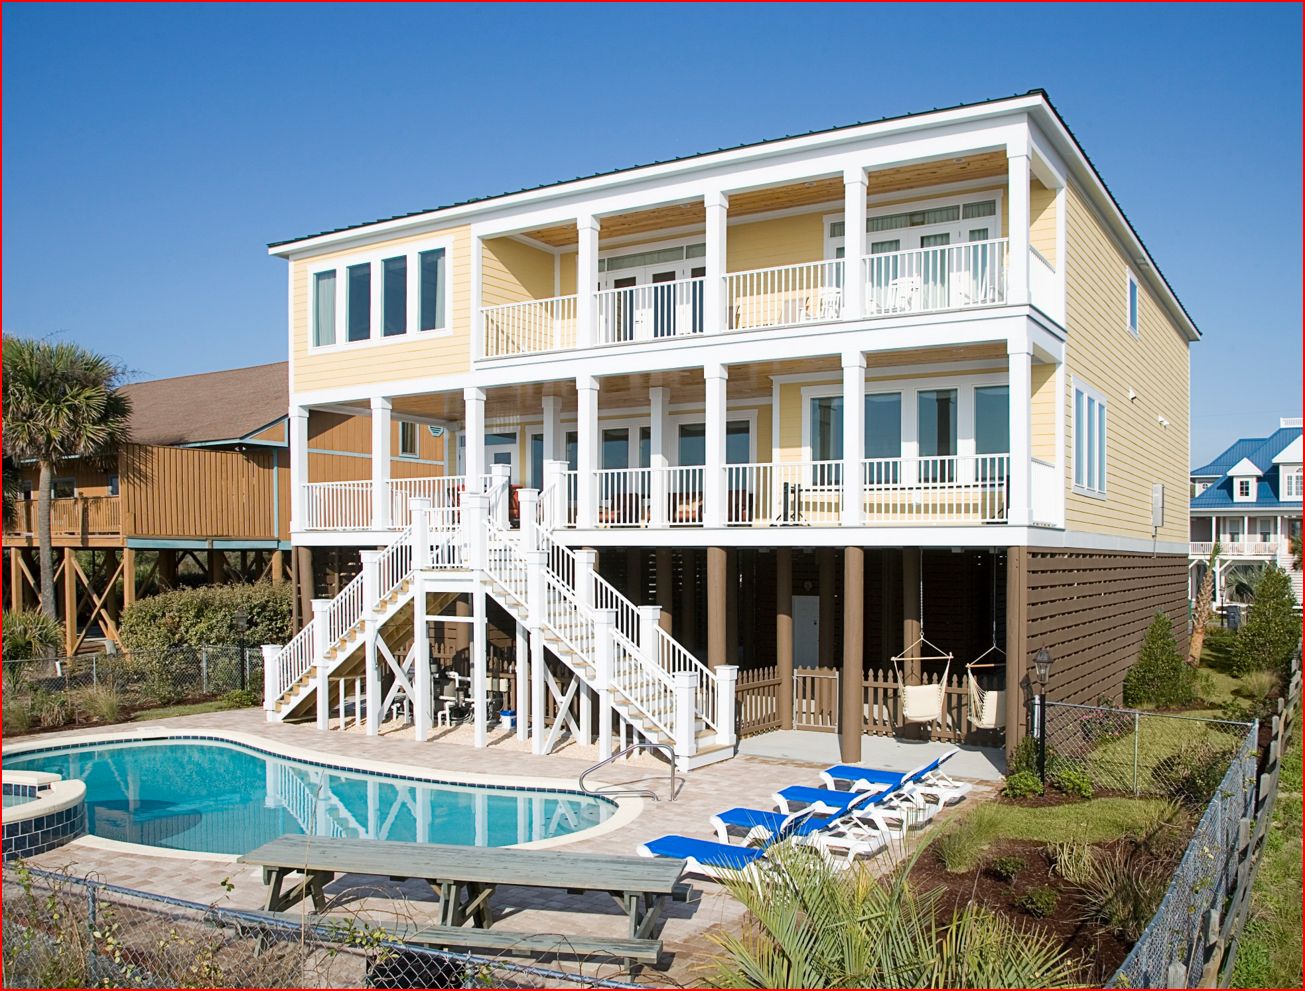 Oceanfront Myrtle Beach Home Sleeps 26. 8br/8.5 Houses for Rent in